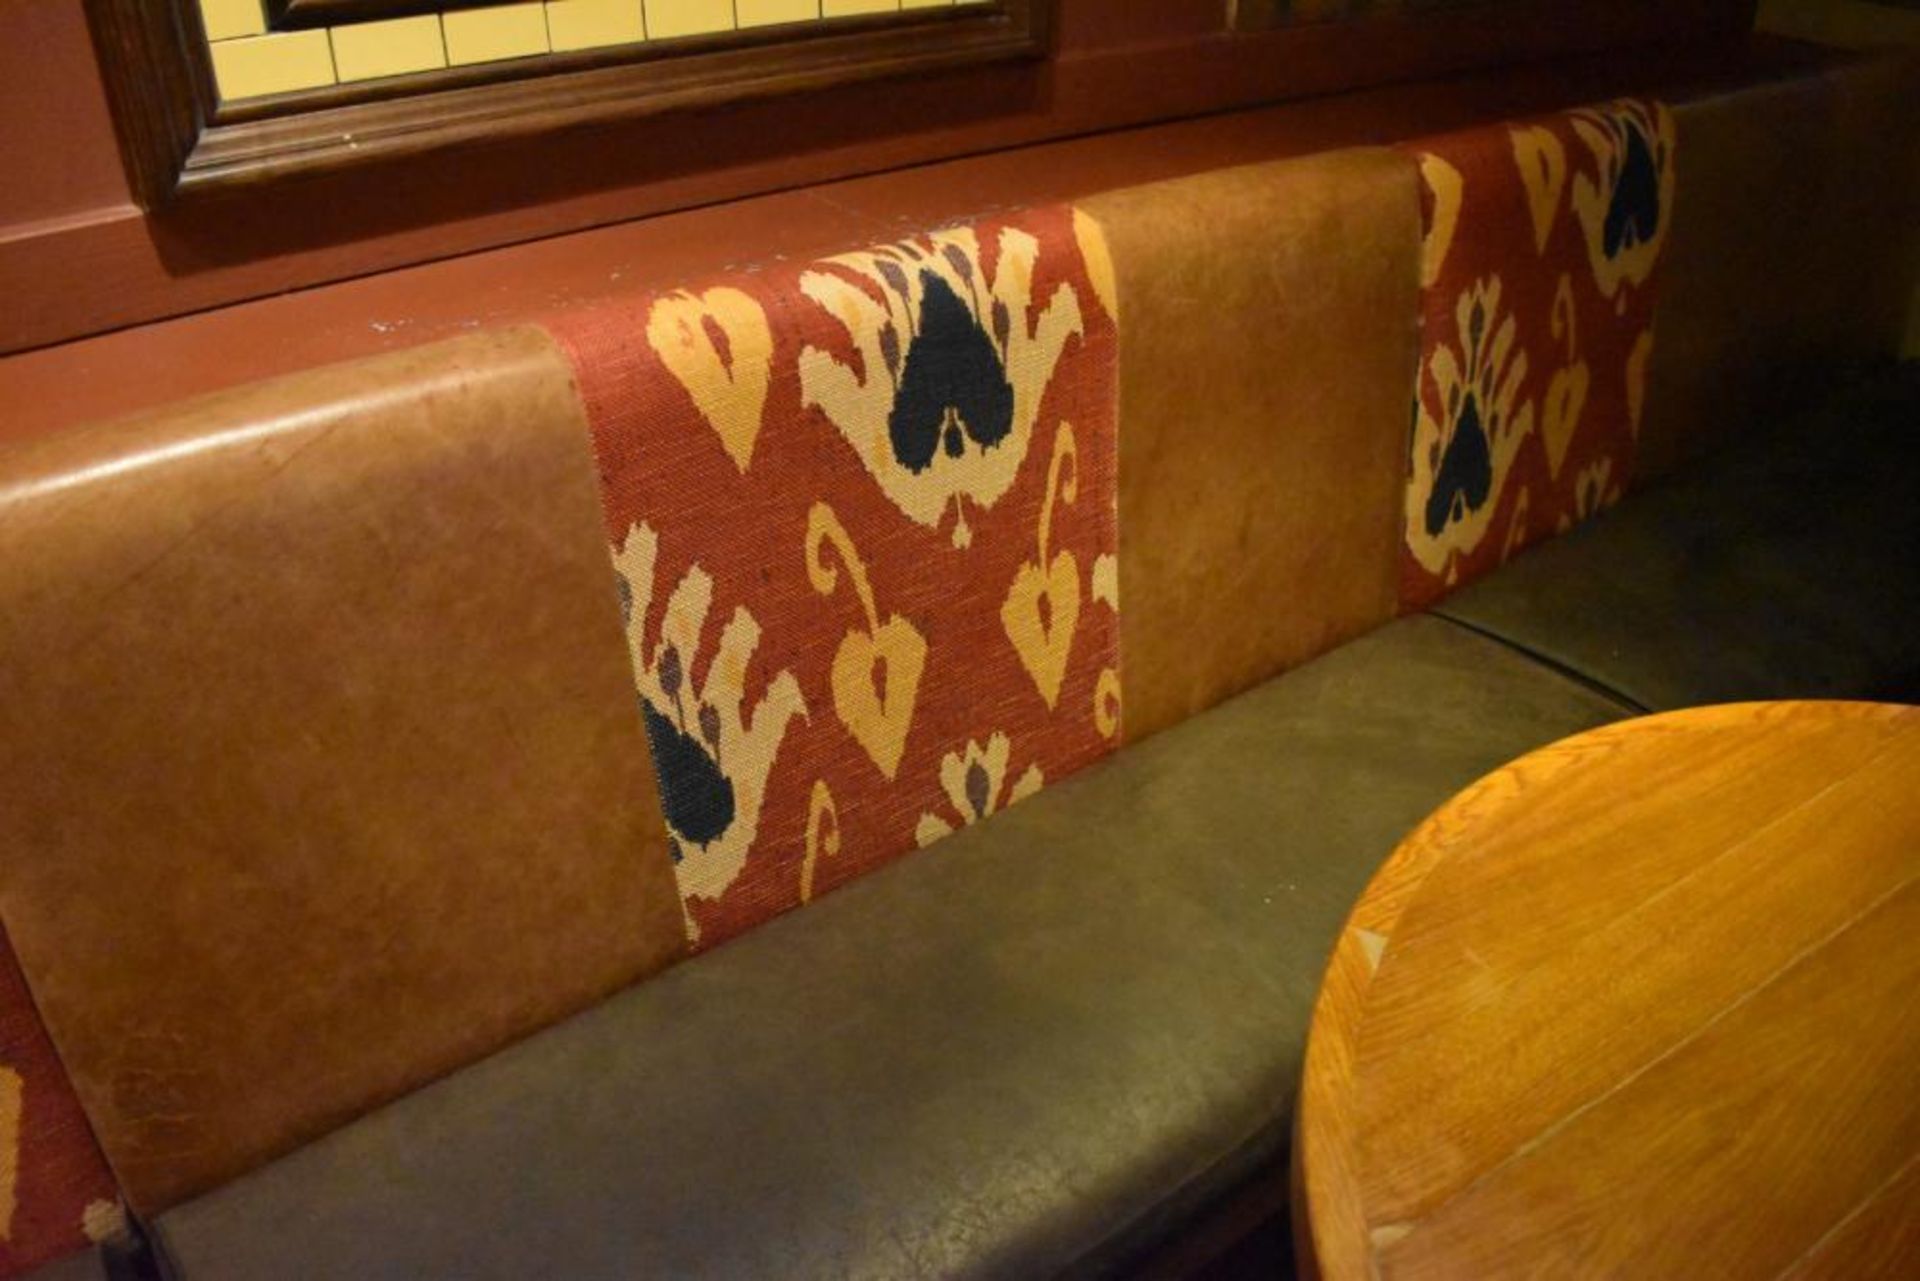 1 x Long Seating Bench From Mexican Themed Restaurant - CL461 - Ref PR889 - Location: London W3 - Image 5 of 7